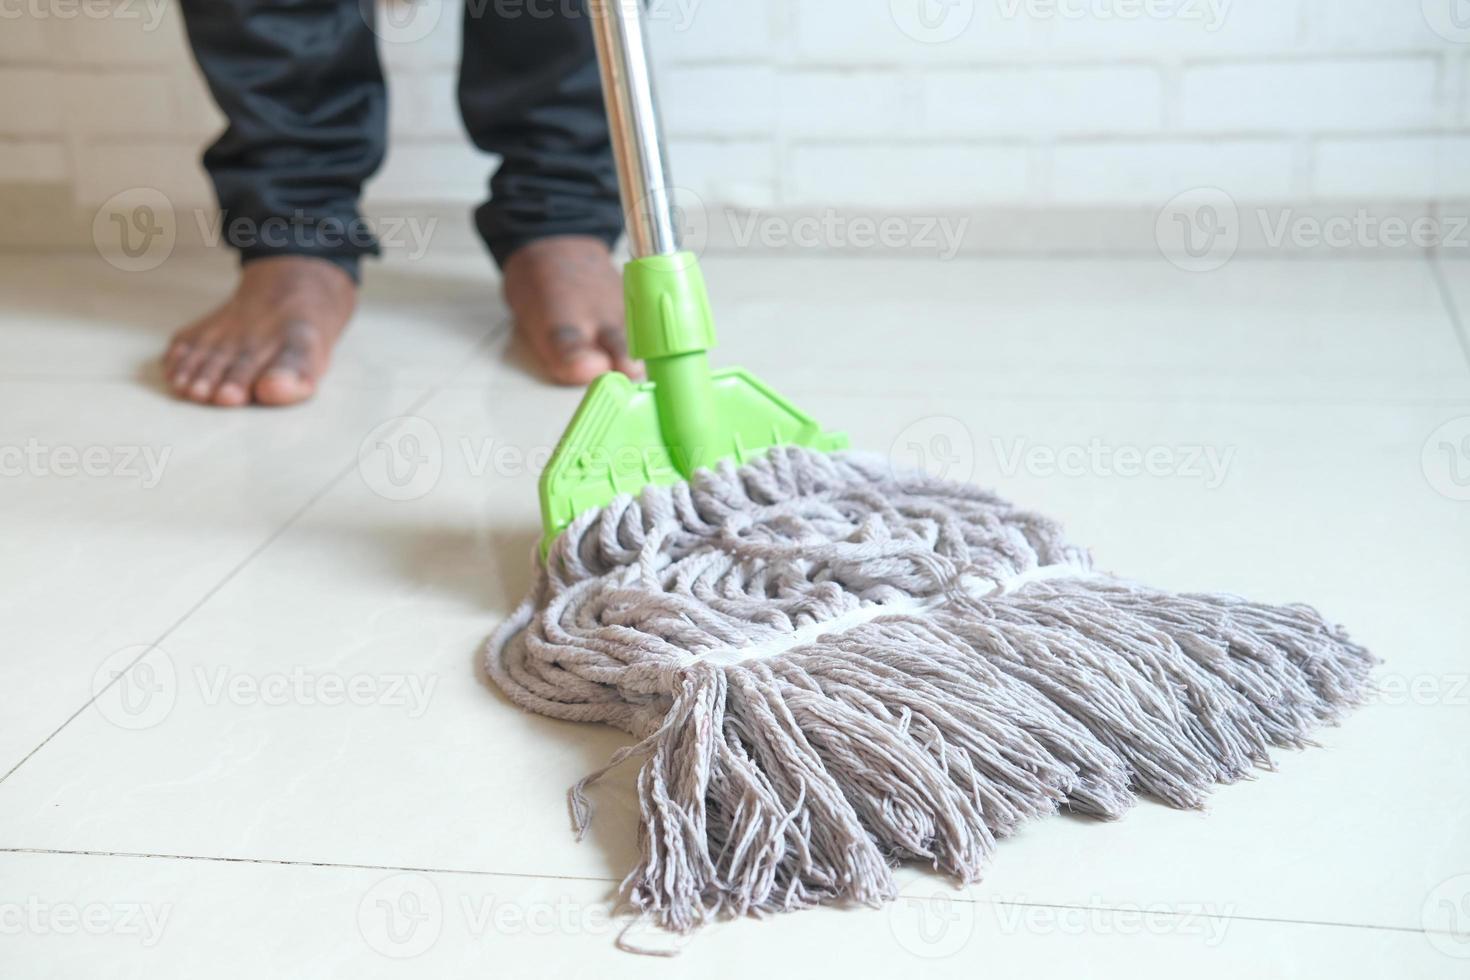 Barefoot person cleaning tile floor with mop photo